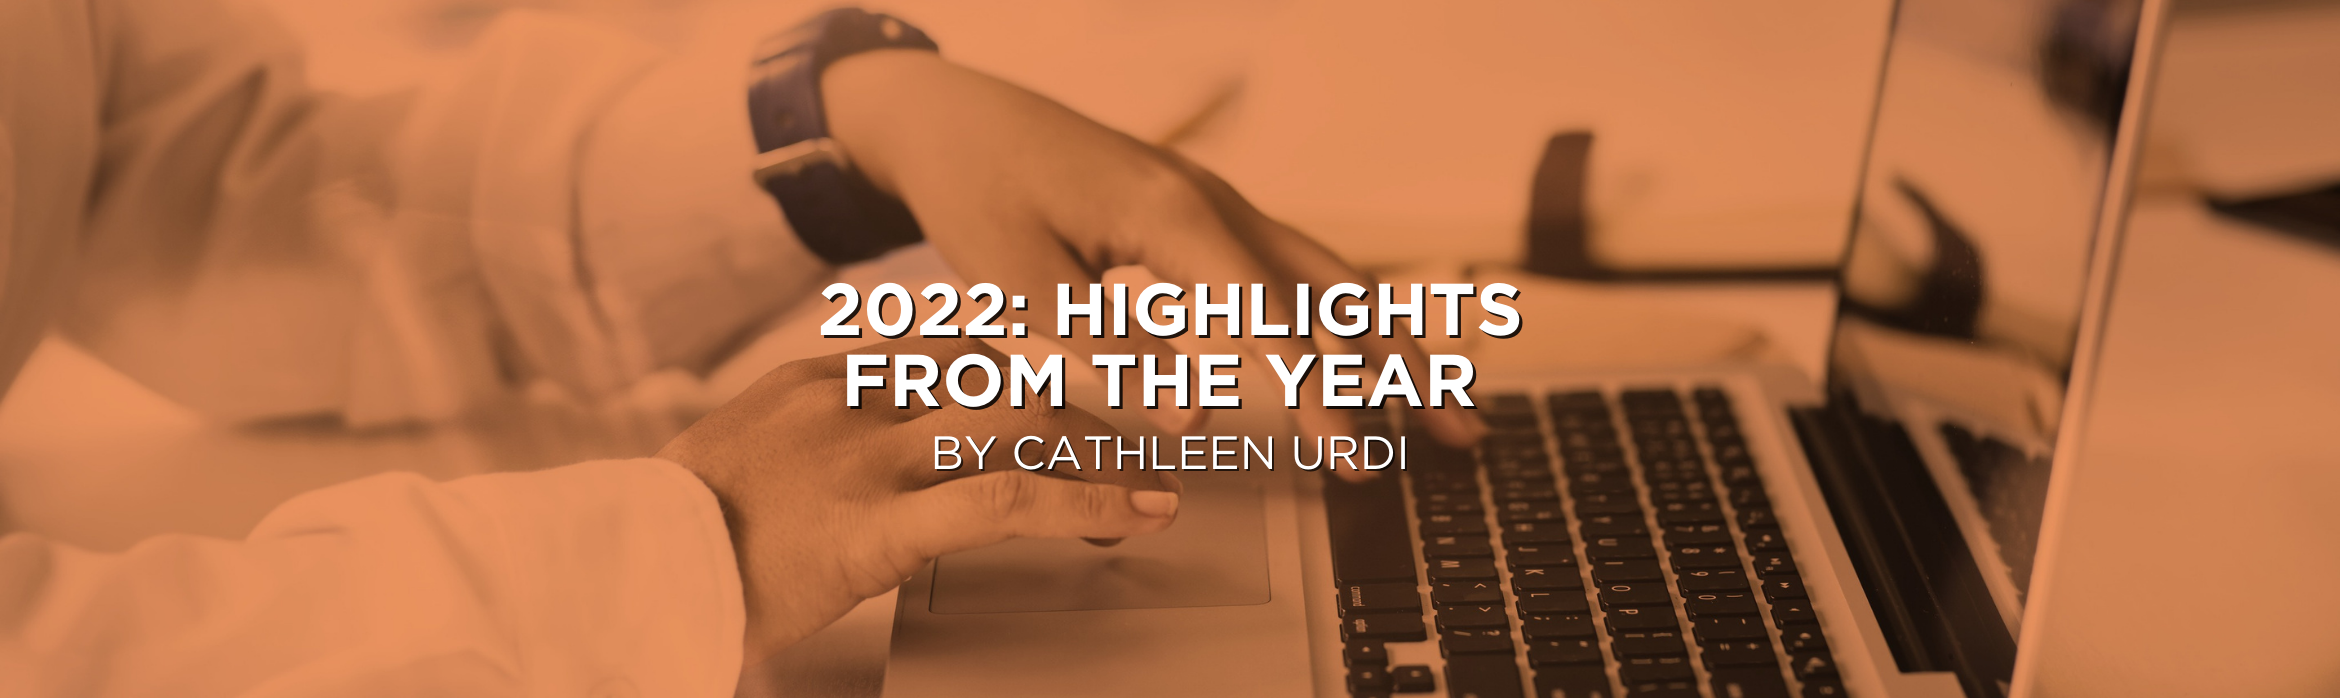 2022: Highlights from the Year